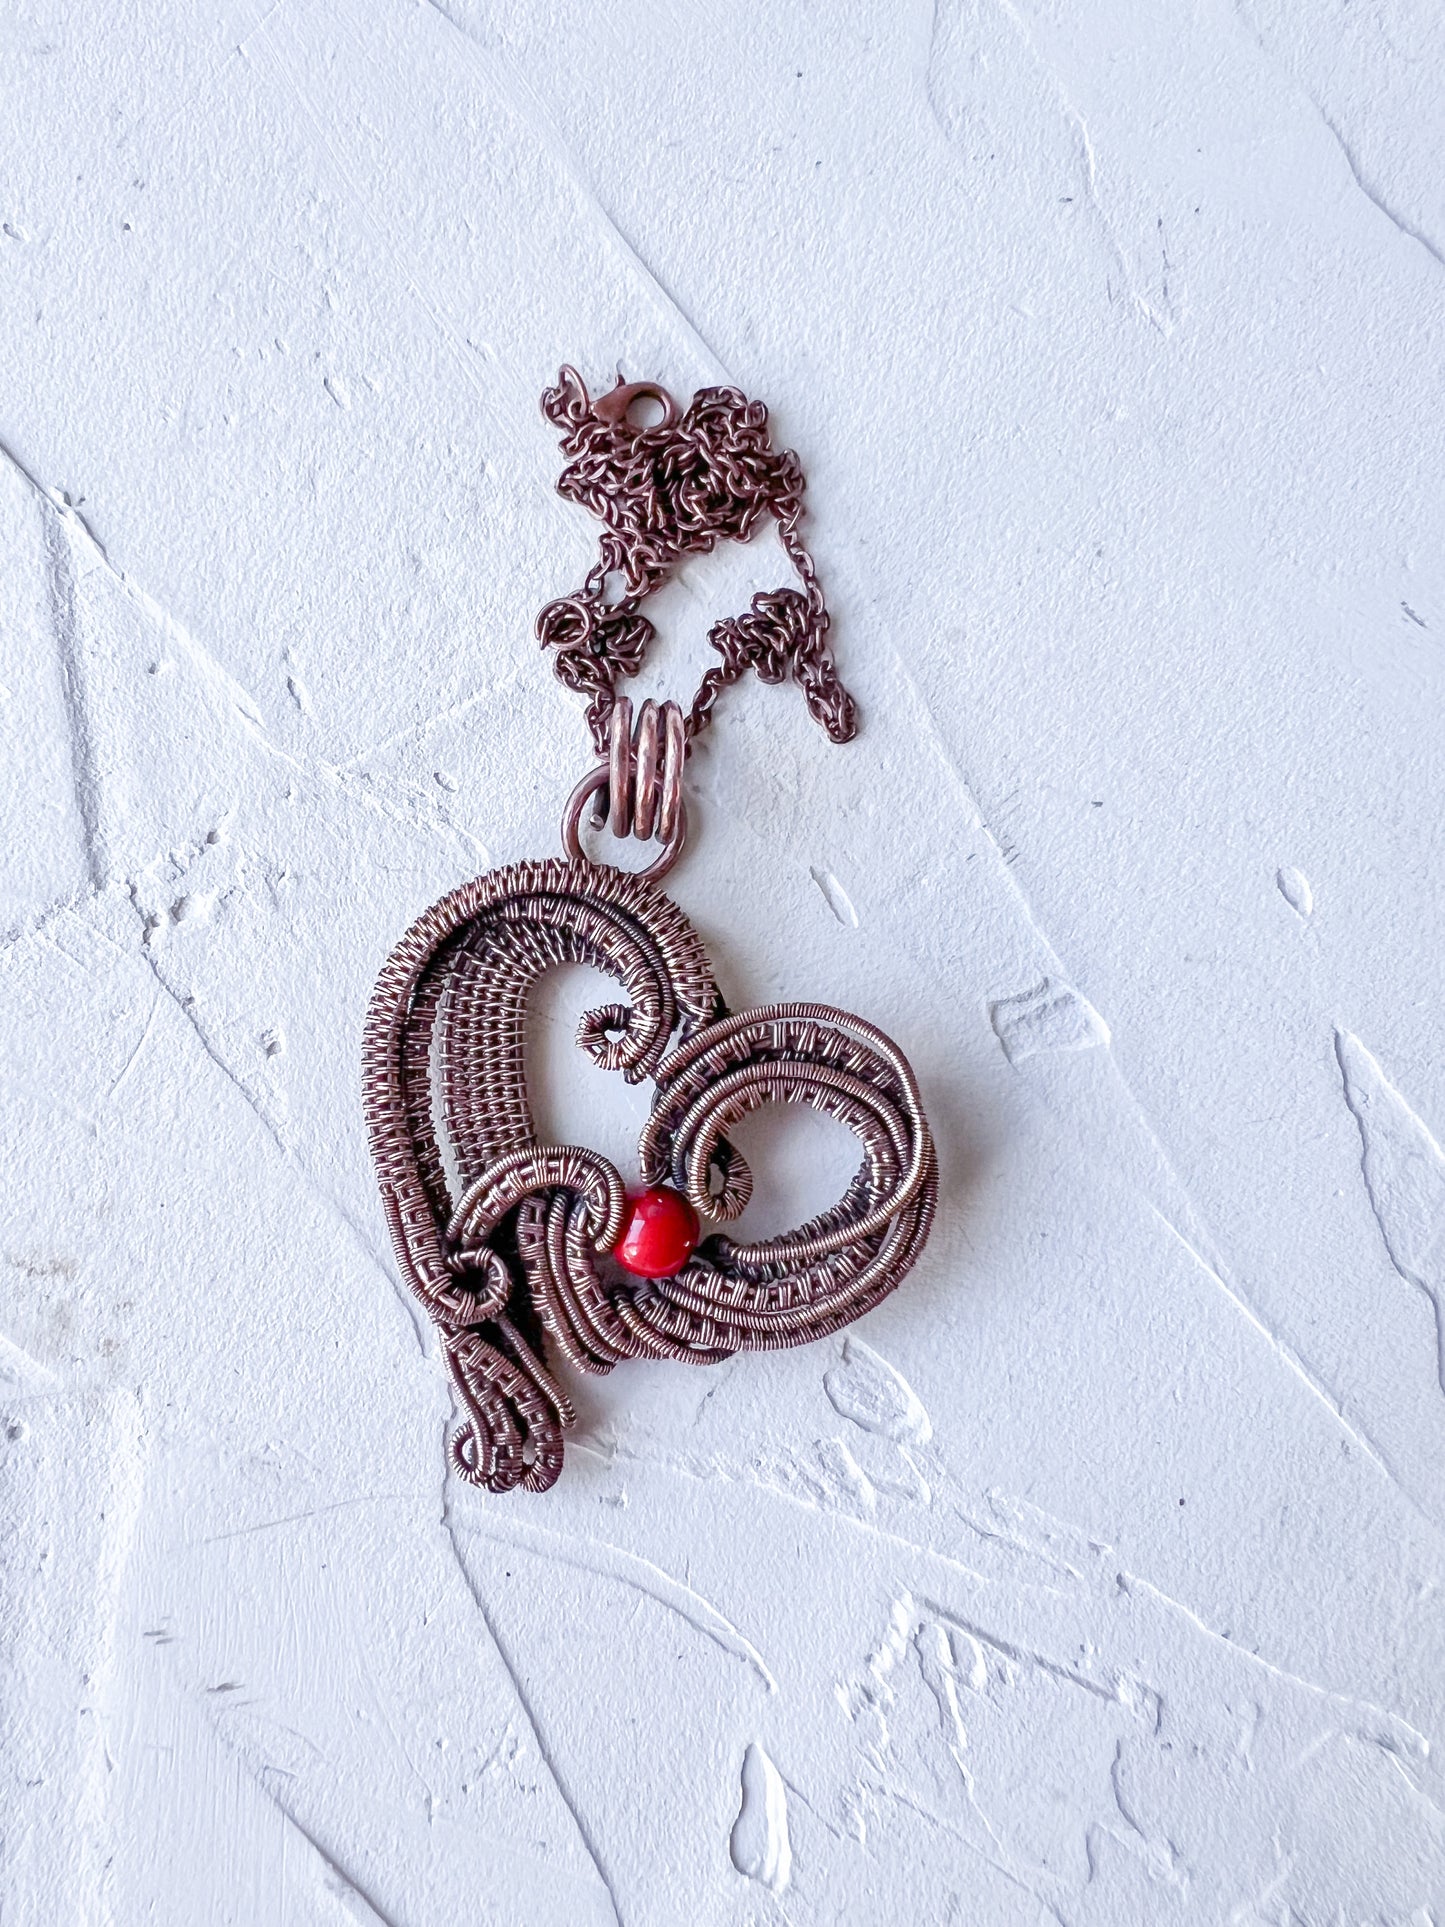 Copper Wire Woven Heart Pendant with Red Jade Bead